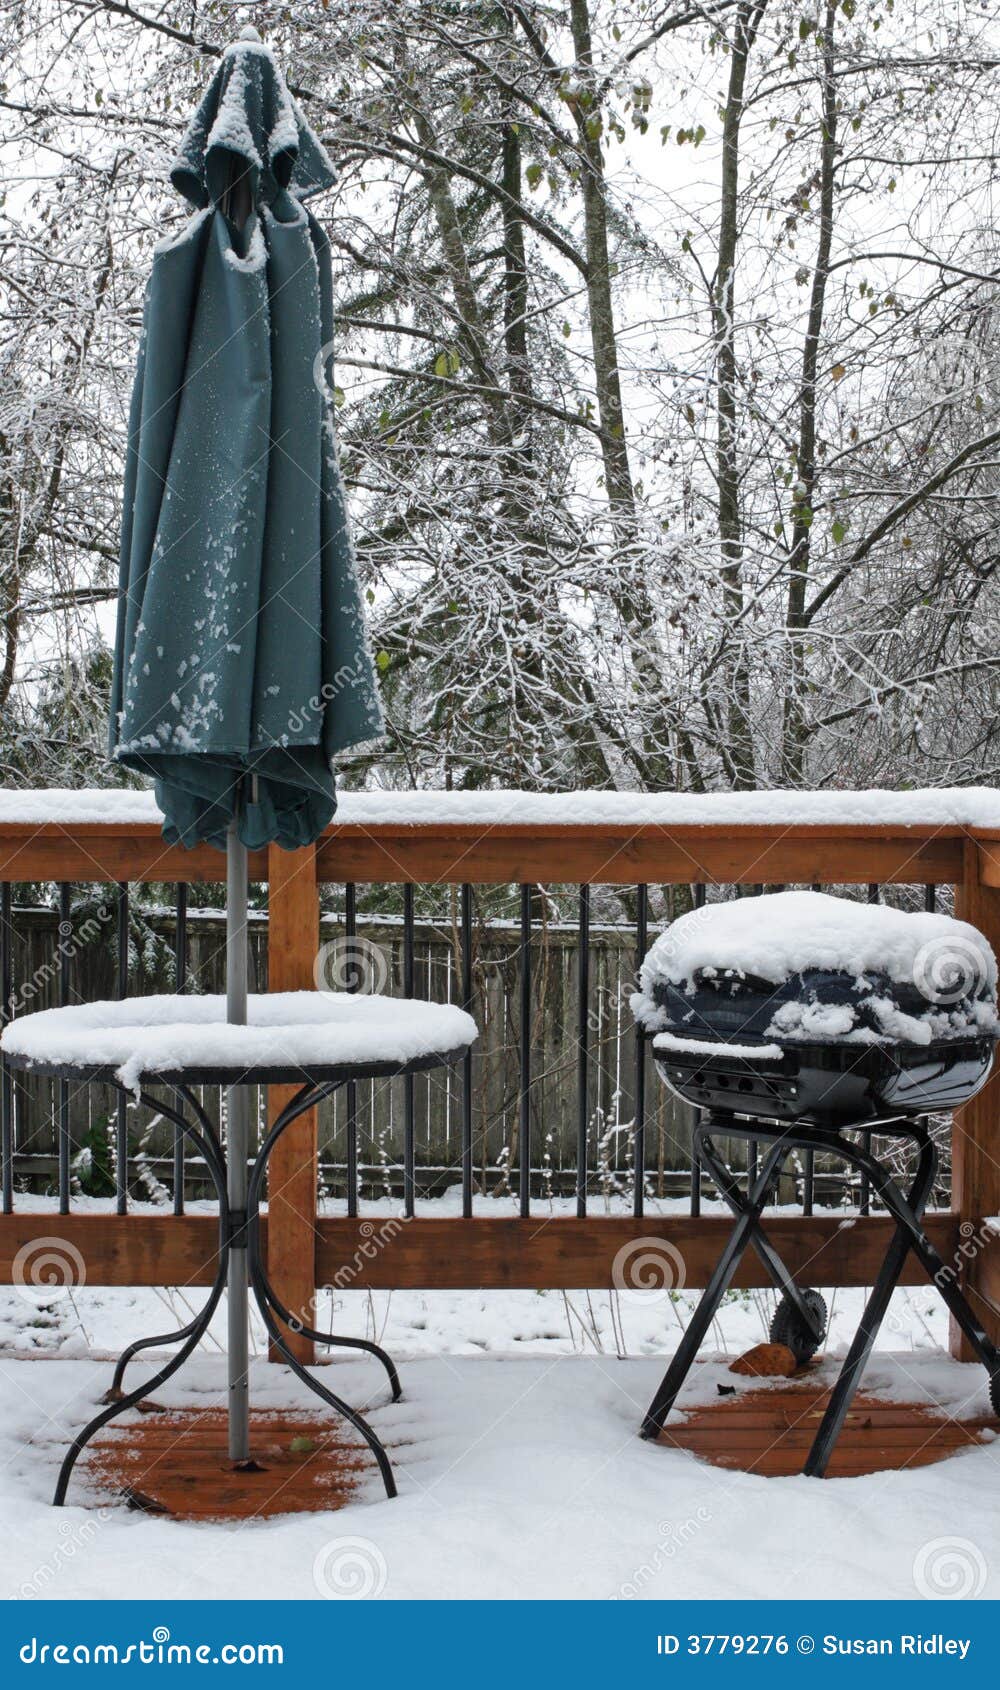 Snow Covered Deck. Snow covering a wood deck with a table, Umbrella and BBQ grill